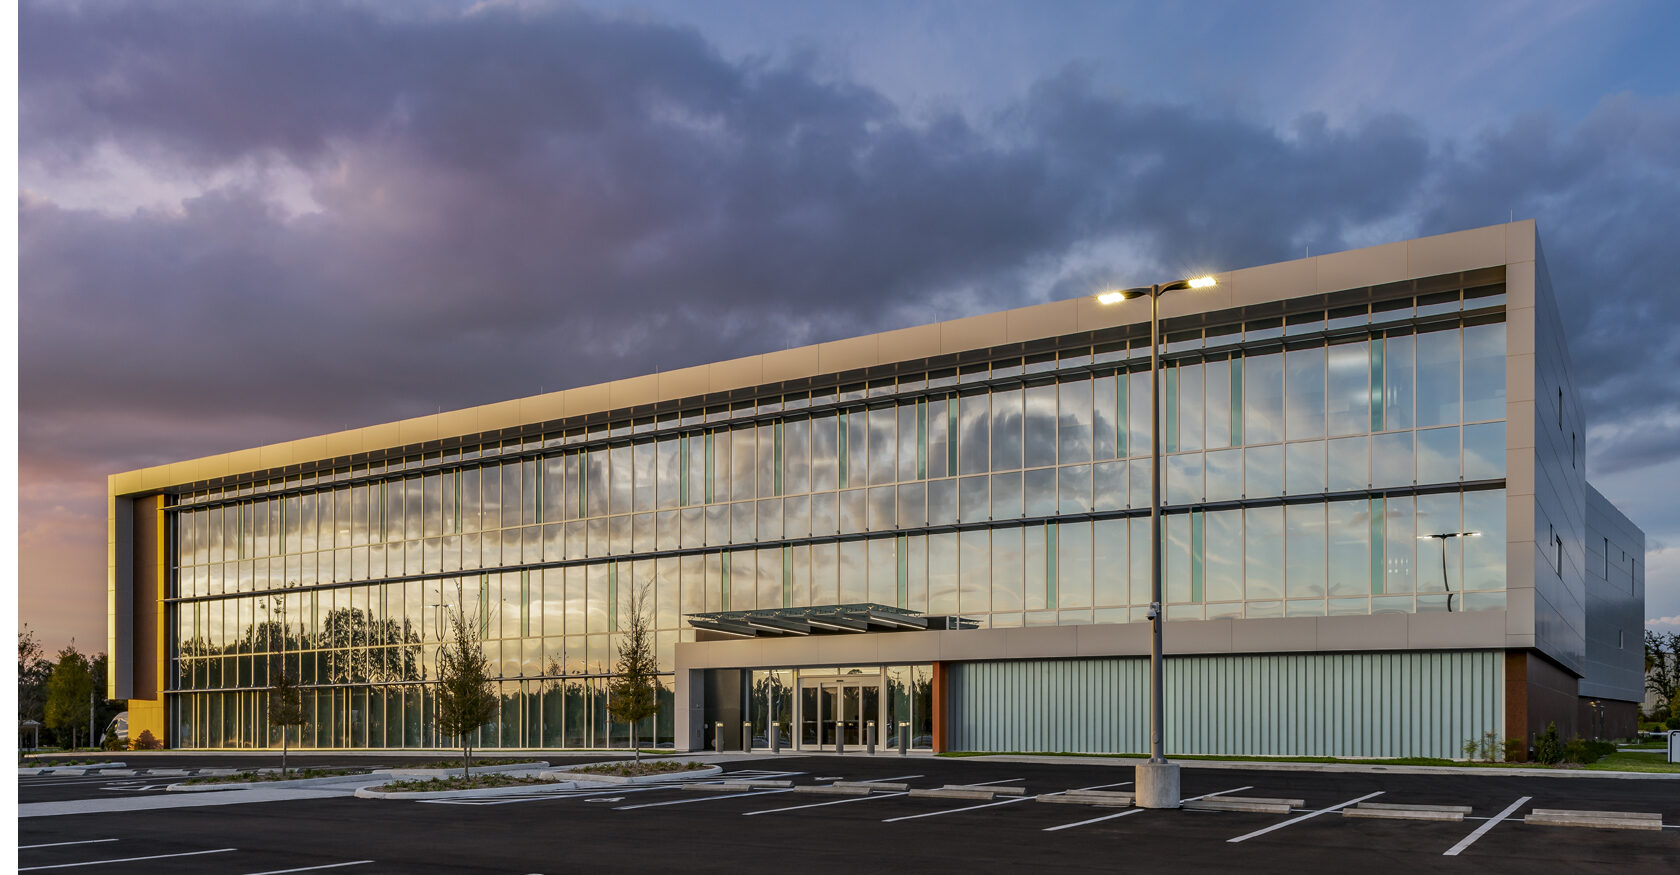 Suncoast Credit Union Exterior shot of their corporate office at dusk